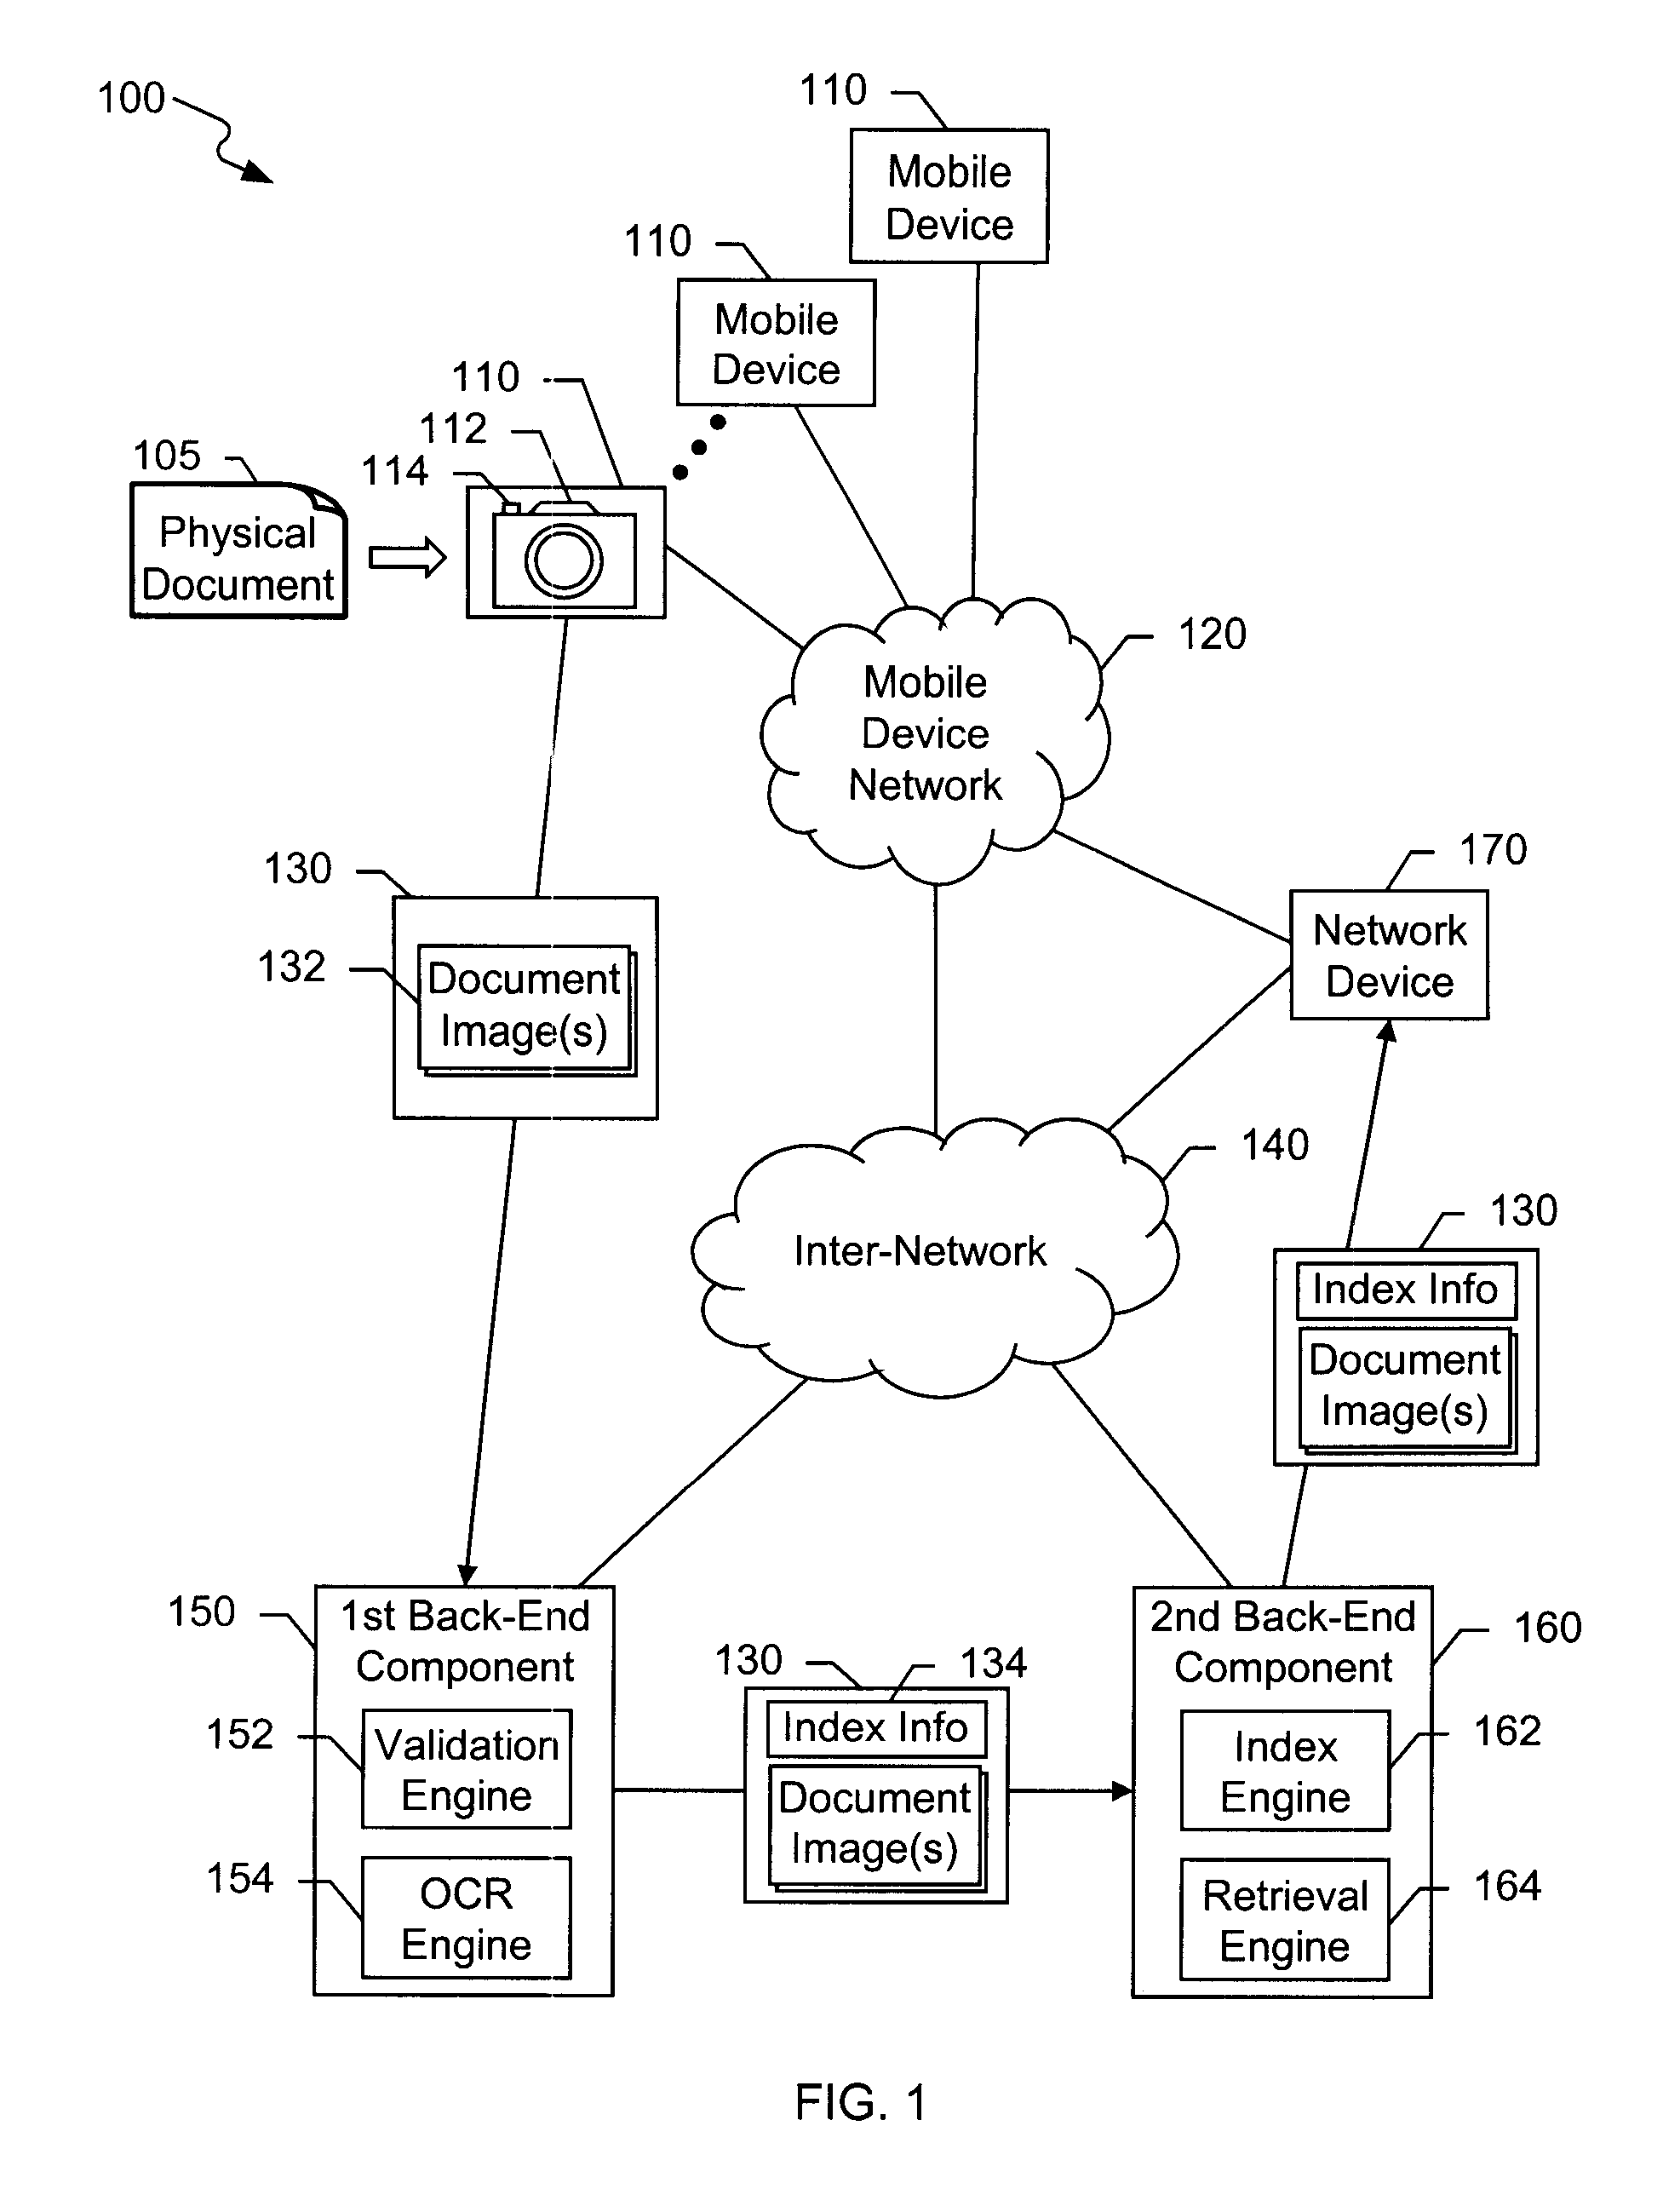 Digital Image Archiving and Retrieval in a Mobile Device System